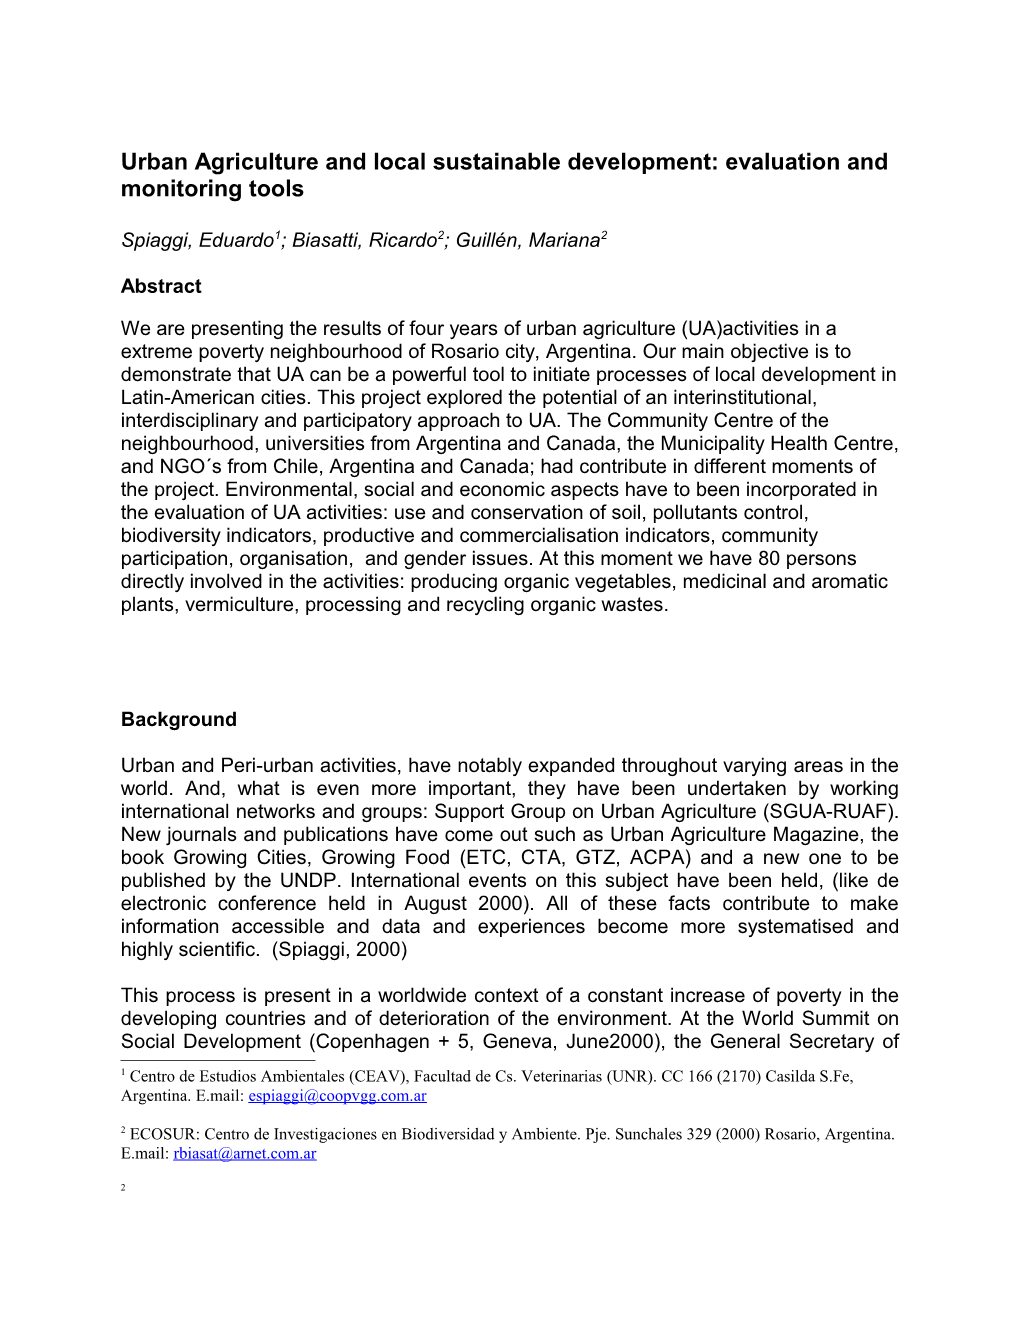 Urban Agriculture and Local Sustainable Development: Evaluation and Monitoring Tools